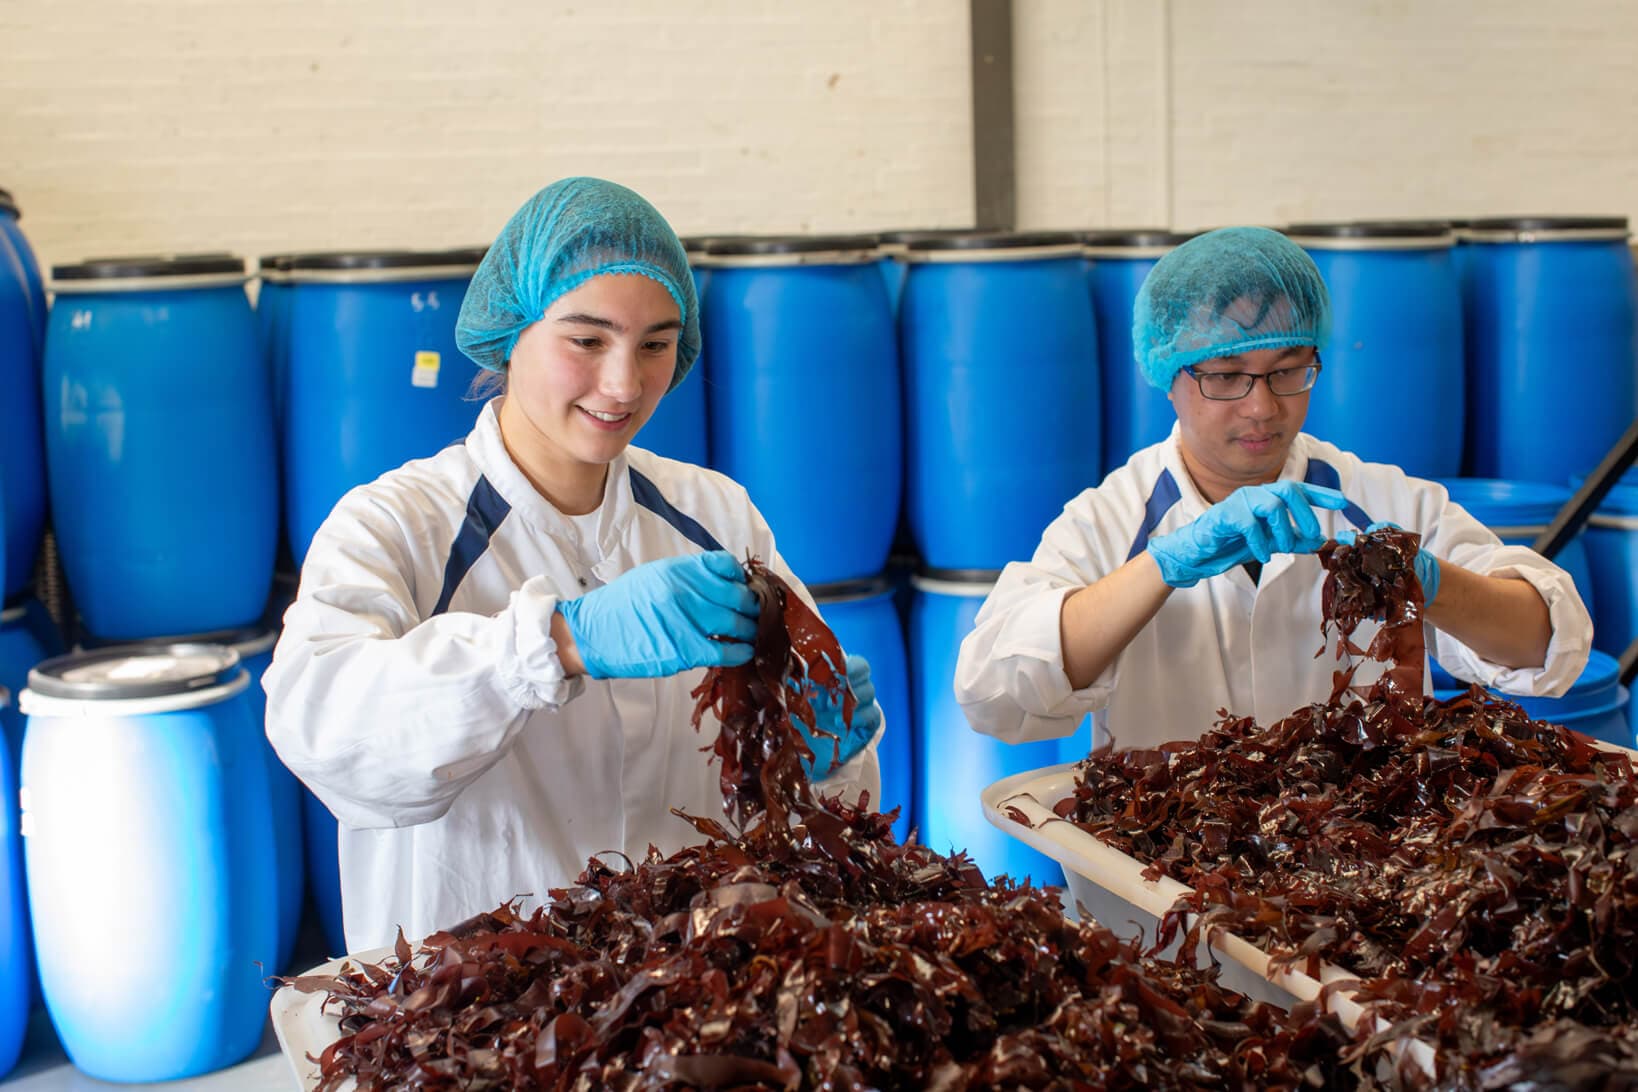 Man and woman sifting through seaweed wearing protective gear